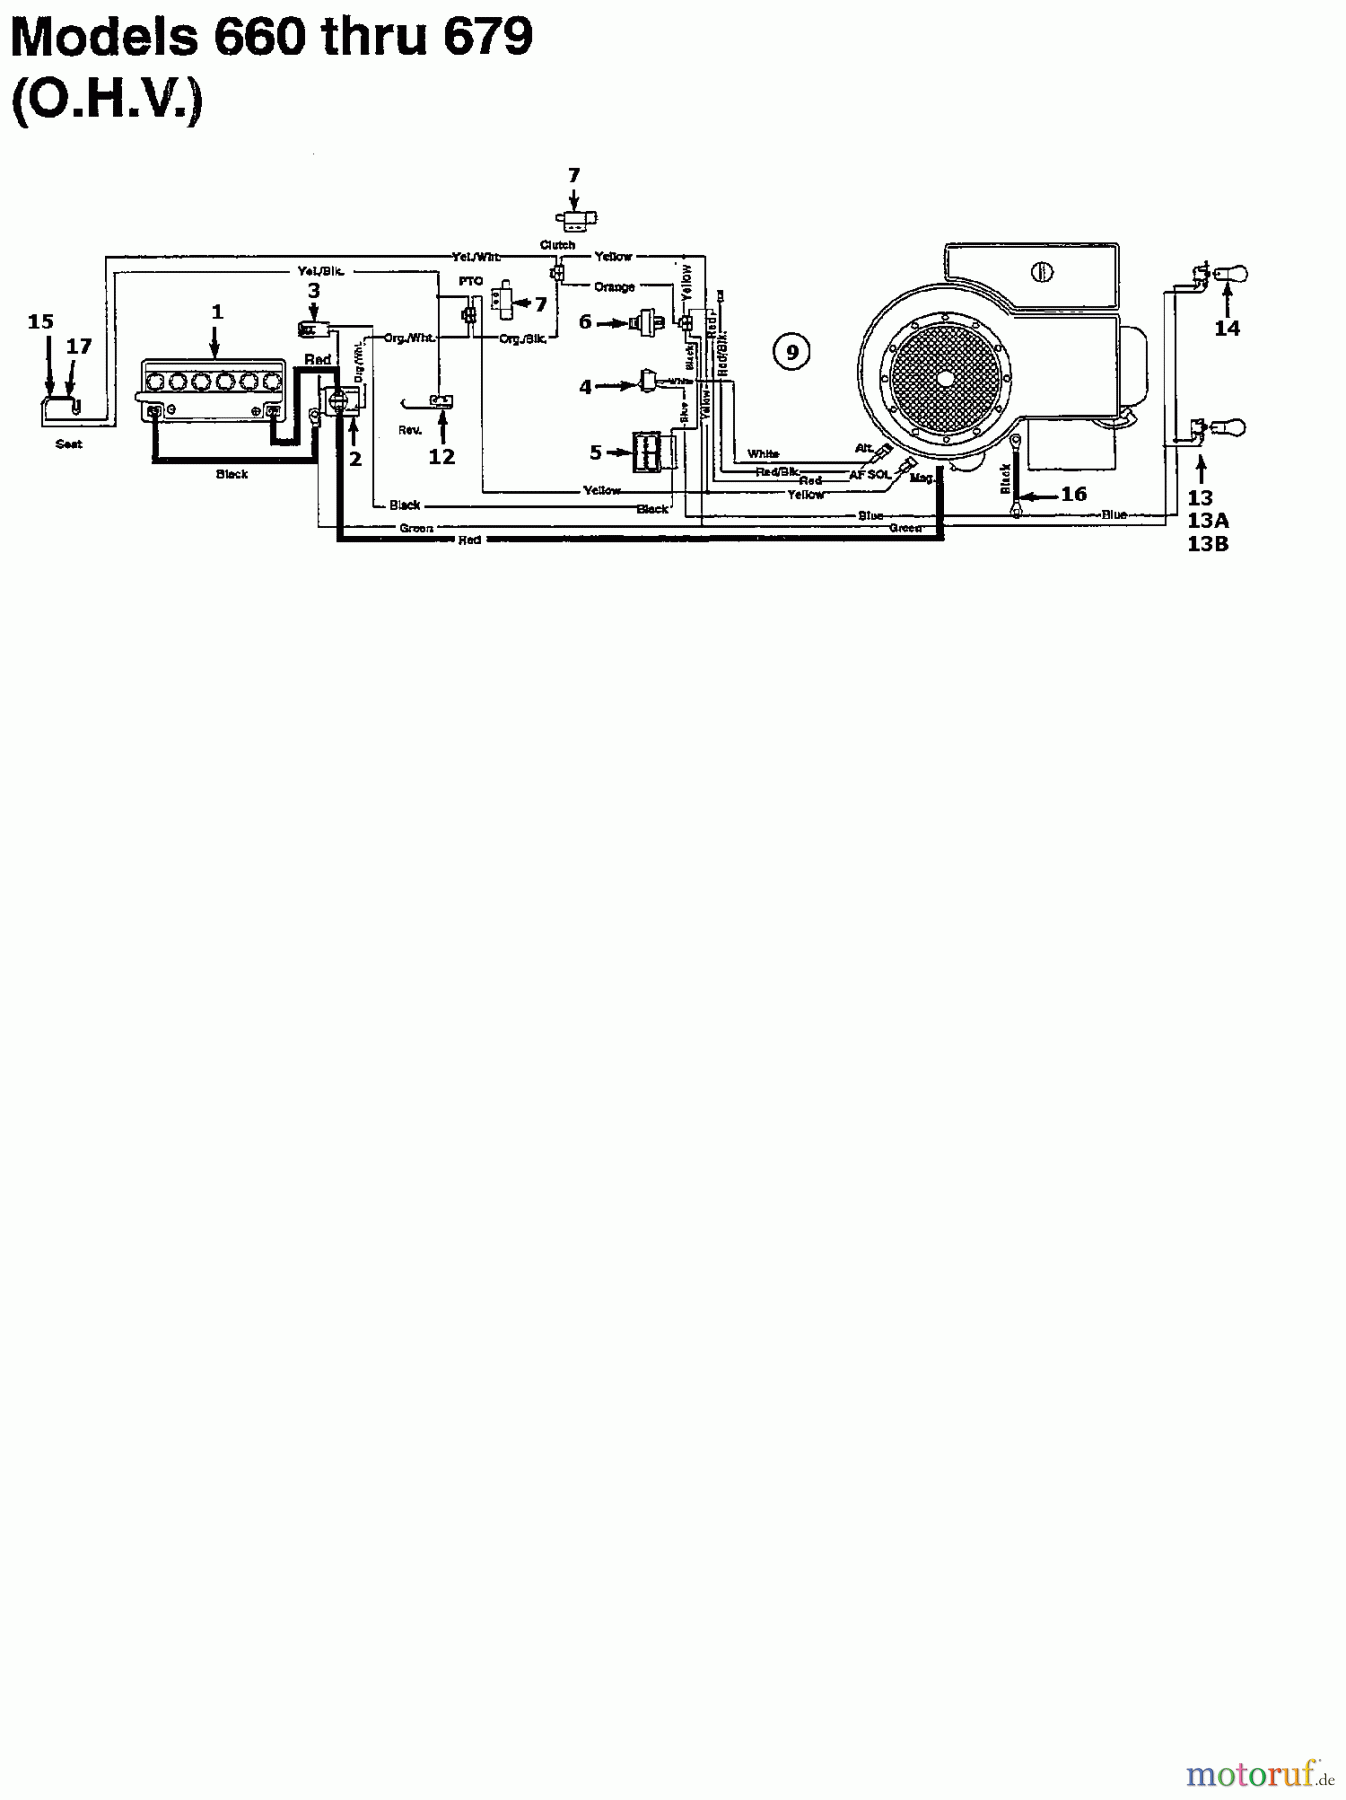  MTD Lawn tractors 12.5/76 134K675C678  (1994) Wiring diagram for O.H.V.